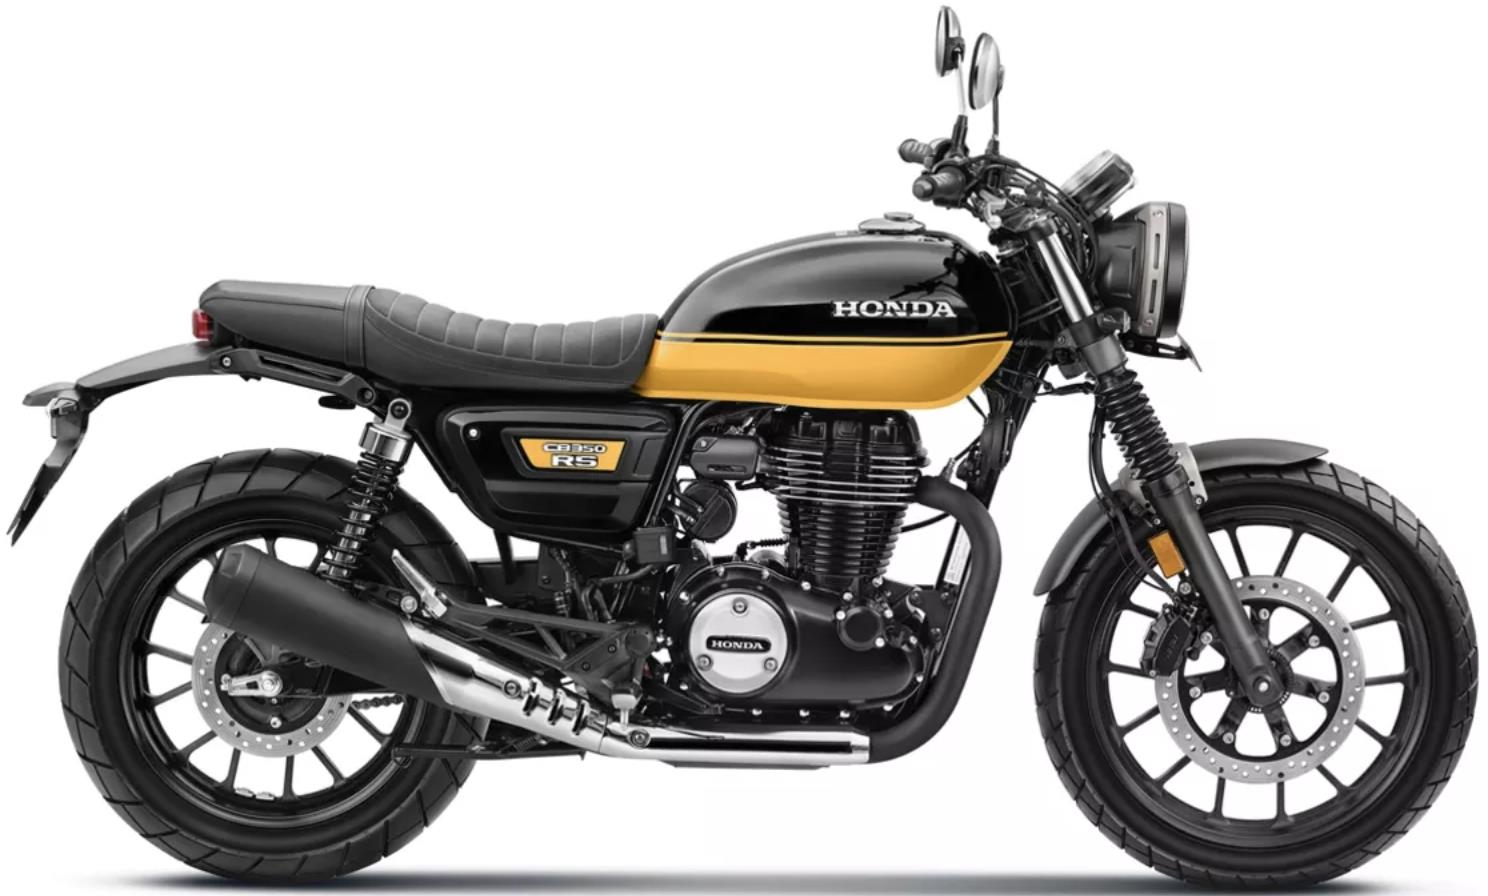 Top 20 Best Bikes Under 2 Lakh in India